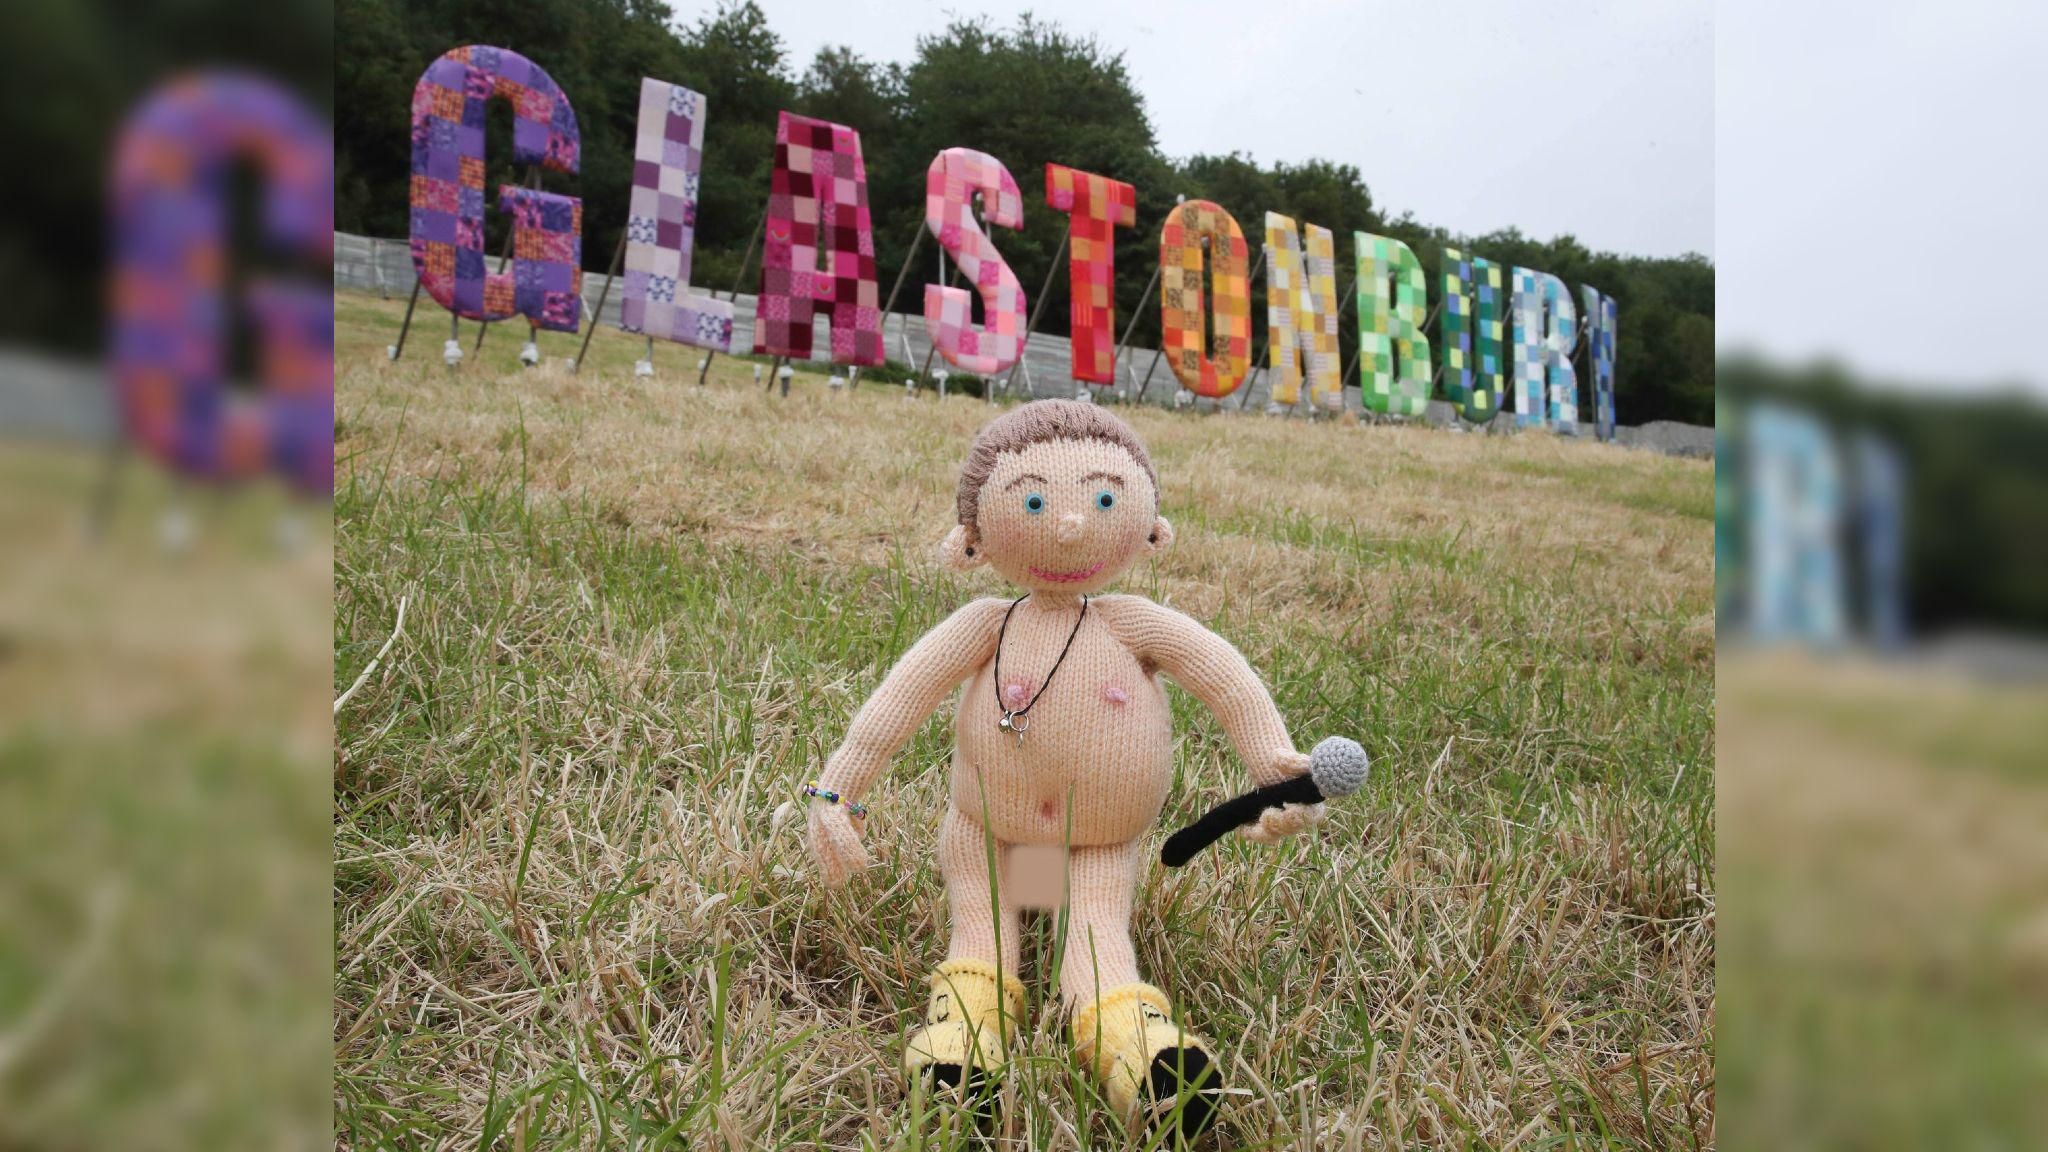 A knitted doll resembling Chris Martin standing on the grass in front of the colourful Glastonbury sign. He is naked and holding a microphone and wearing yellow boots